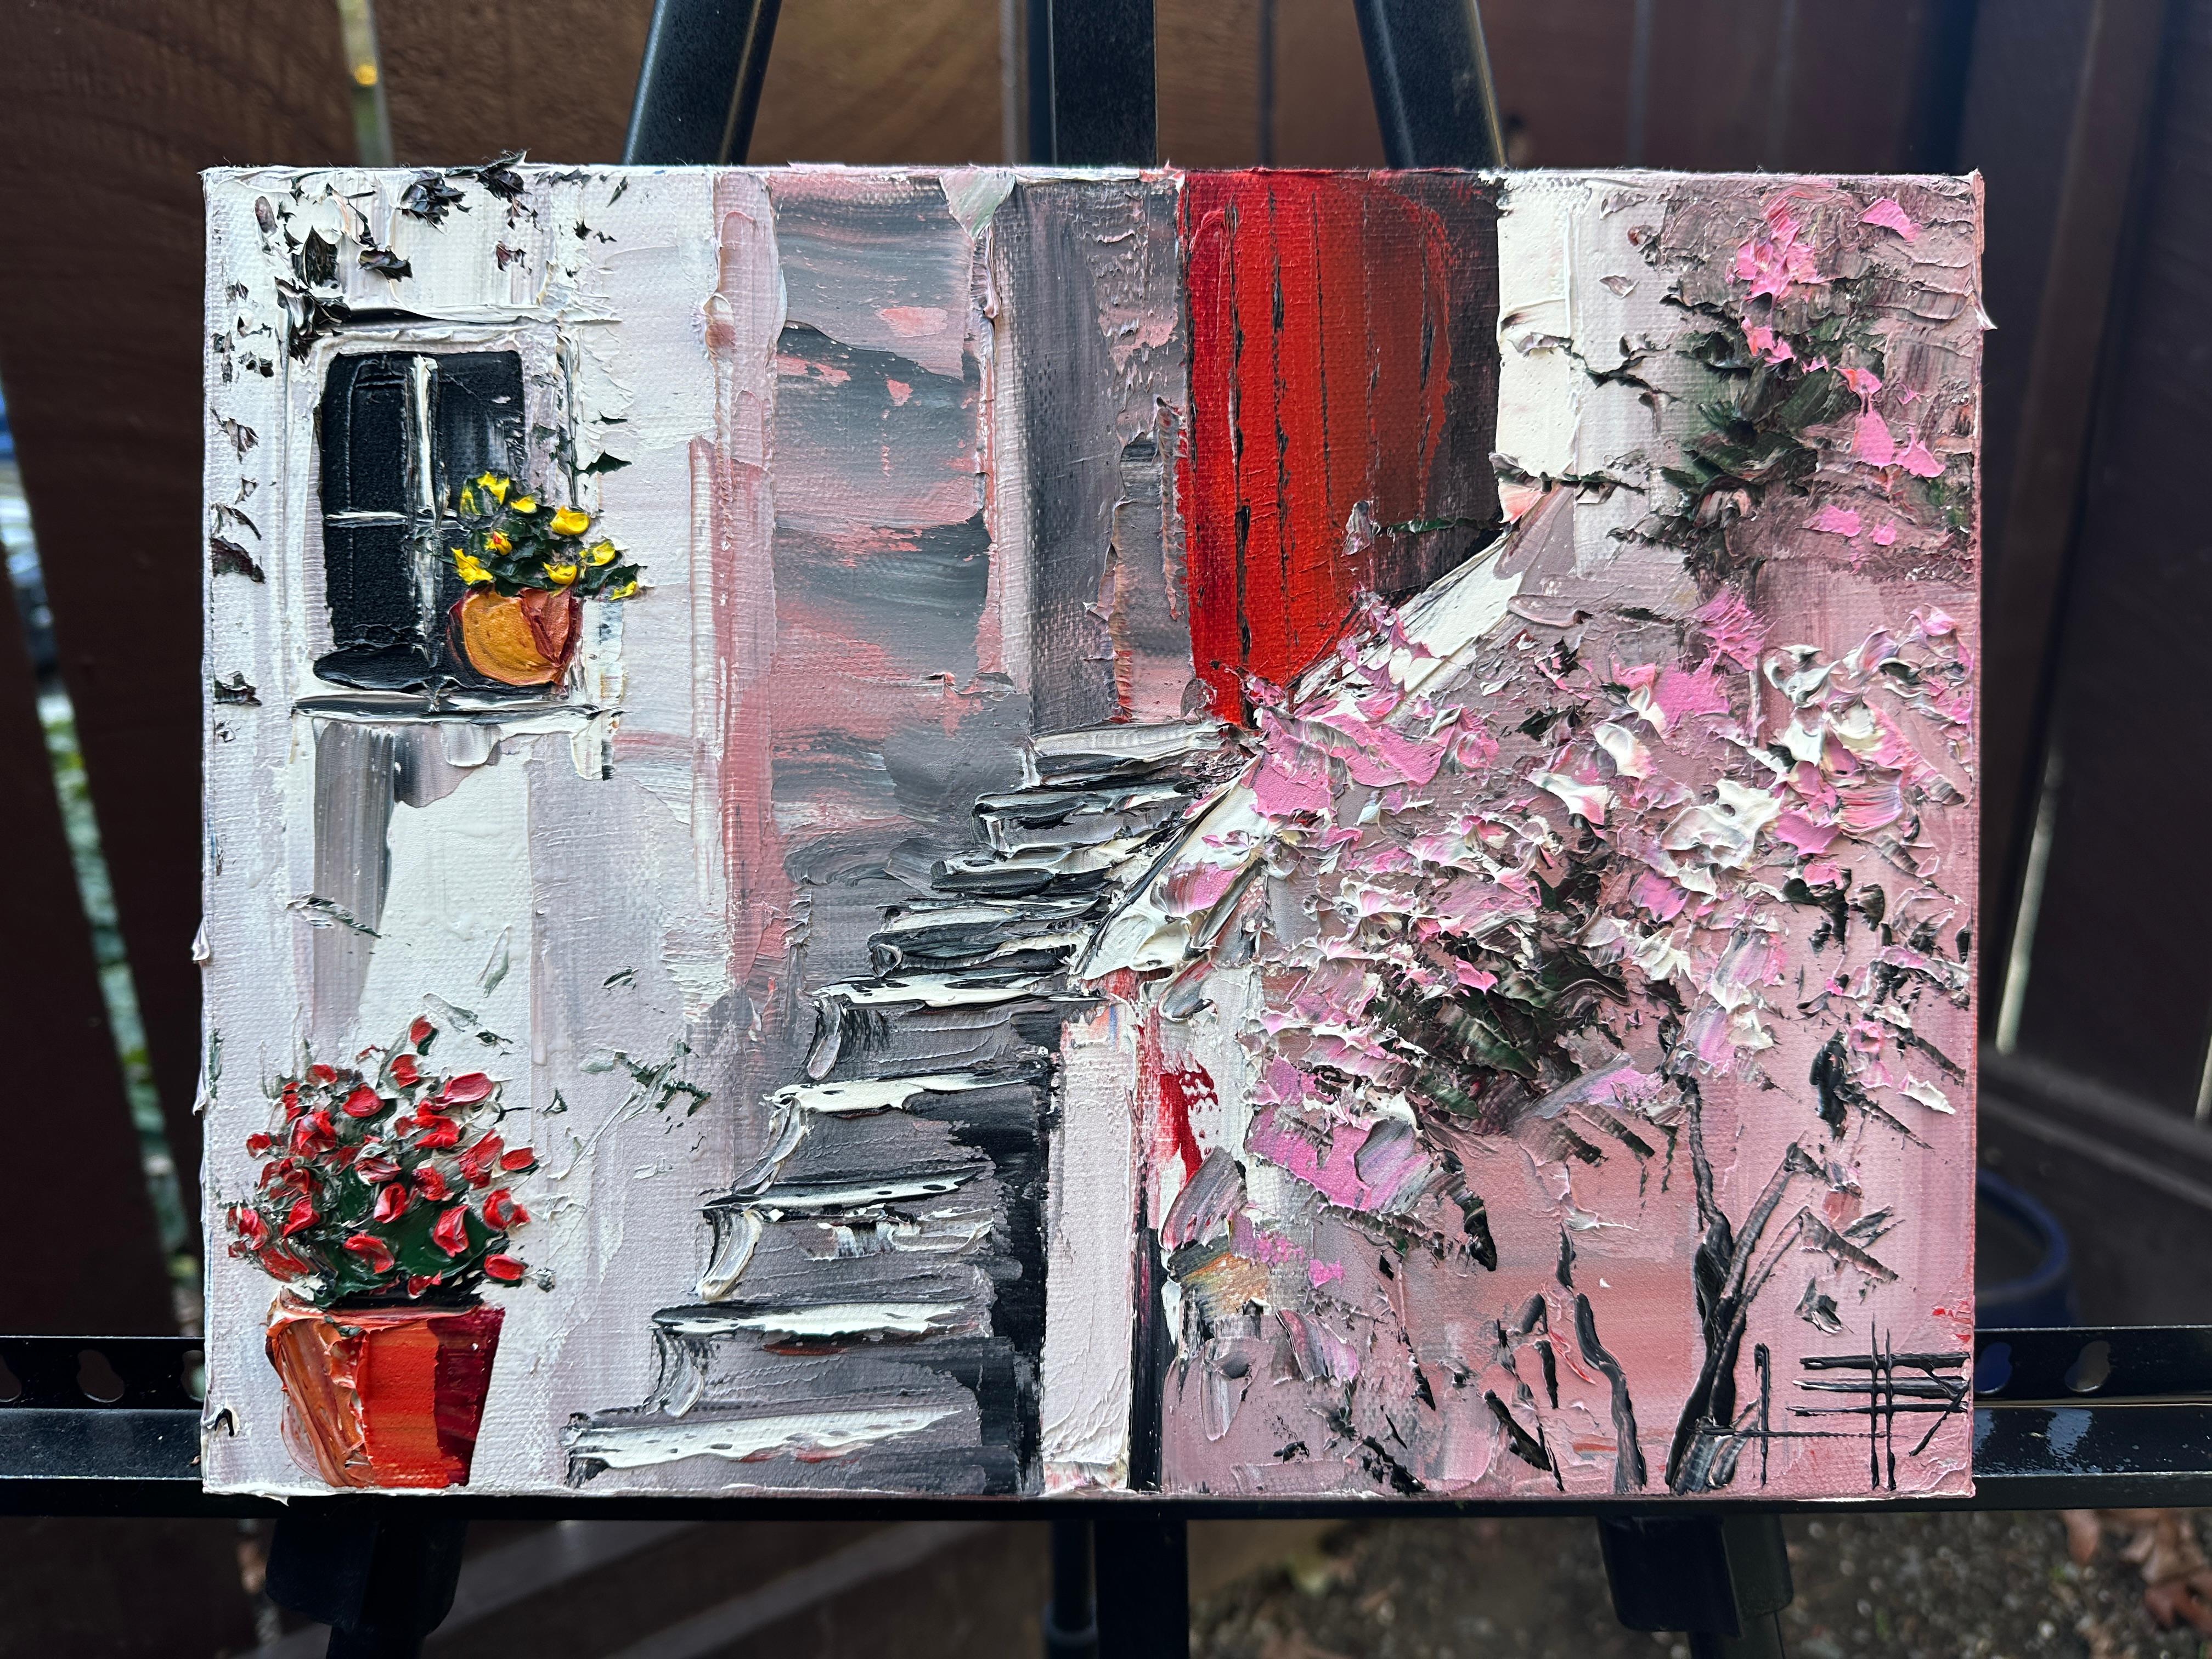 <p>Artist Comments<br>This painting draws inspiration from the architecture of quintessential Italian villages. The sunlight accentuates the stone walls and shutters, while a pot of geraniums in the foreground adds a dramatic visual effect. Painted